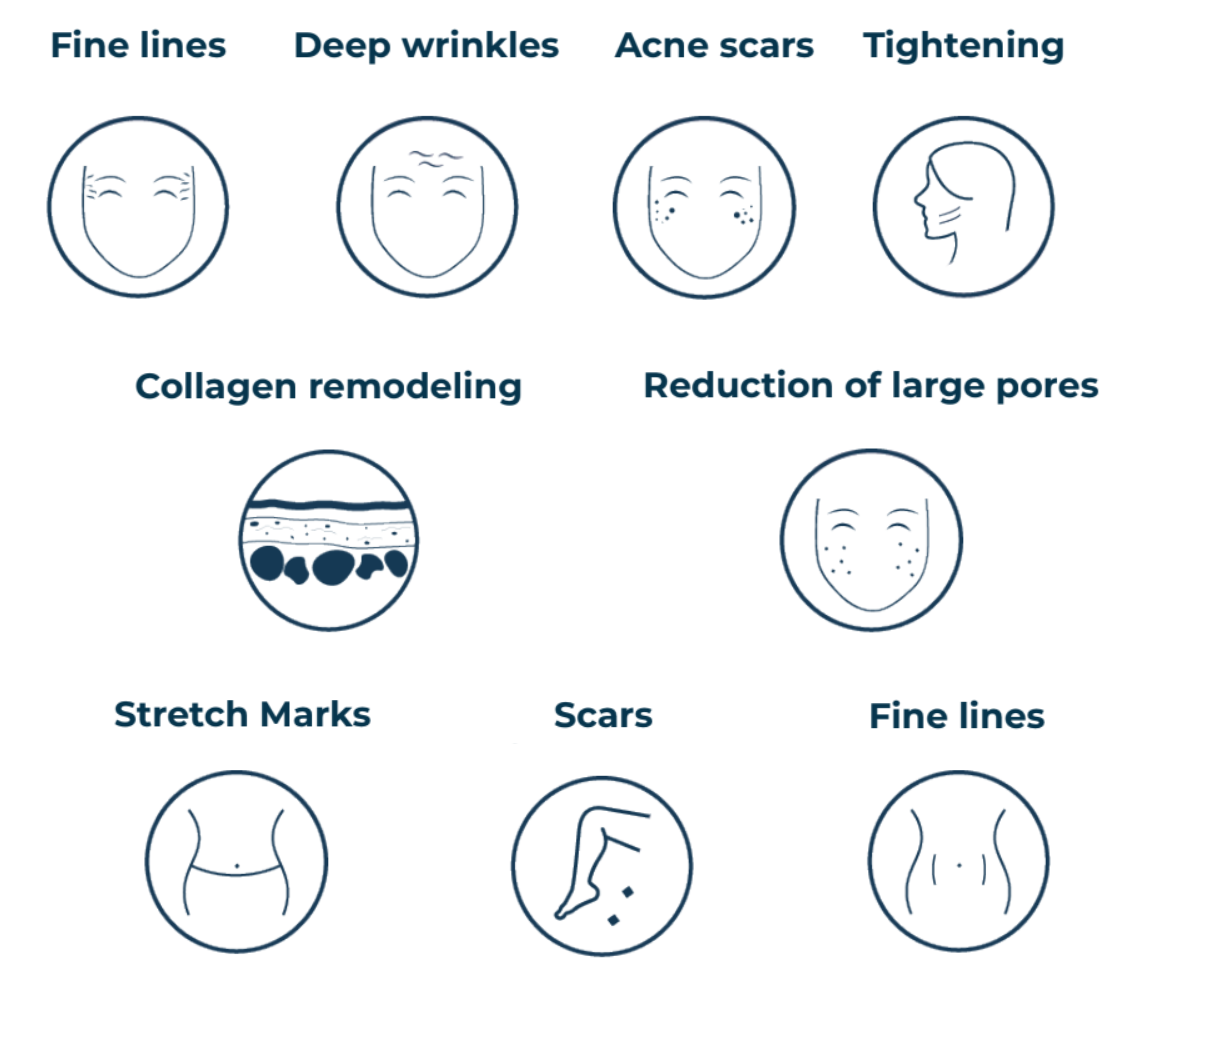 There are many different types of wrinkles and scars on the face.